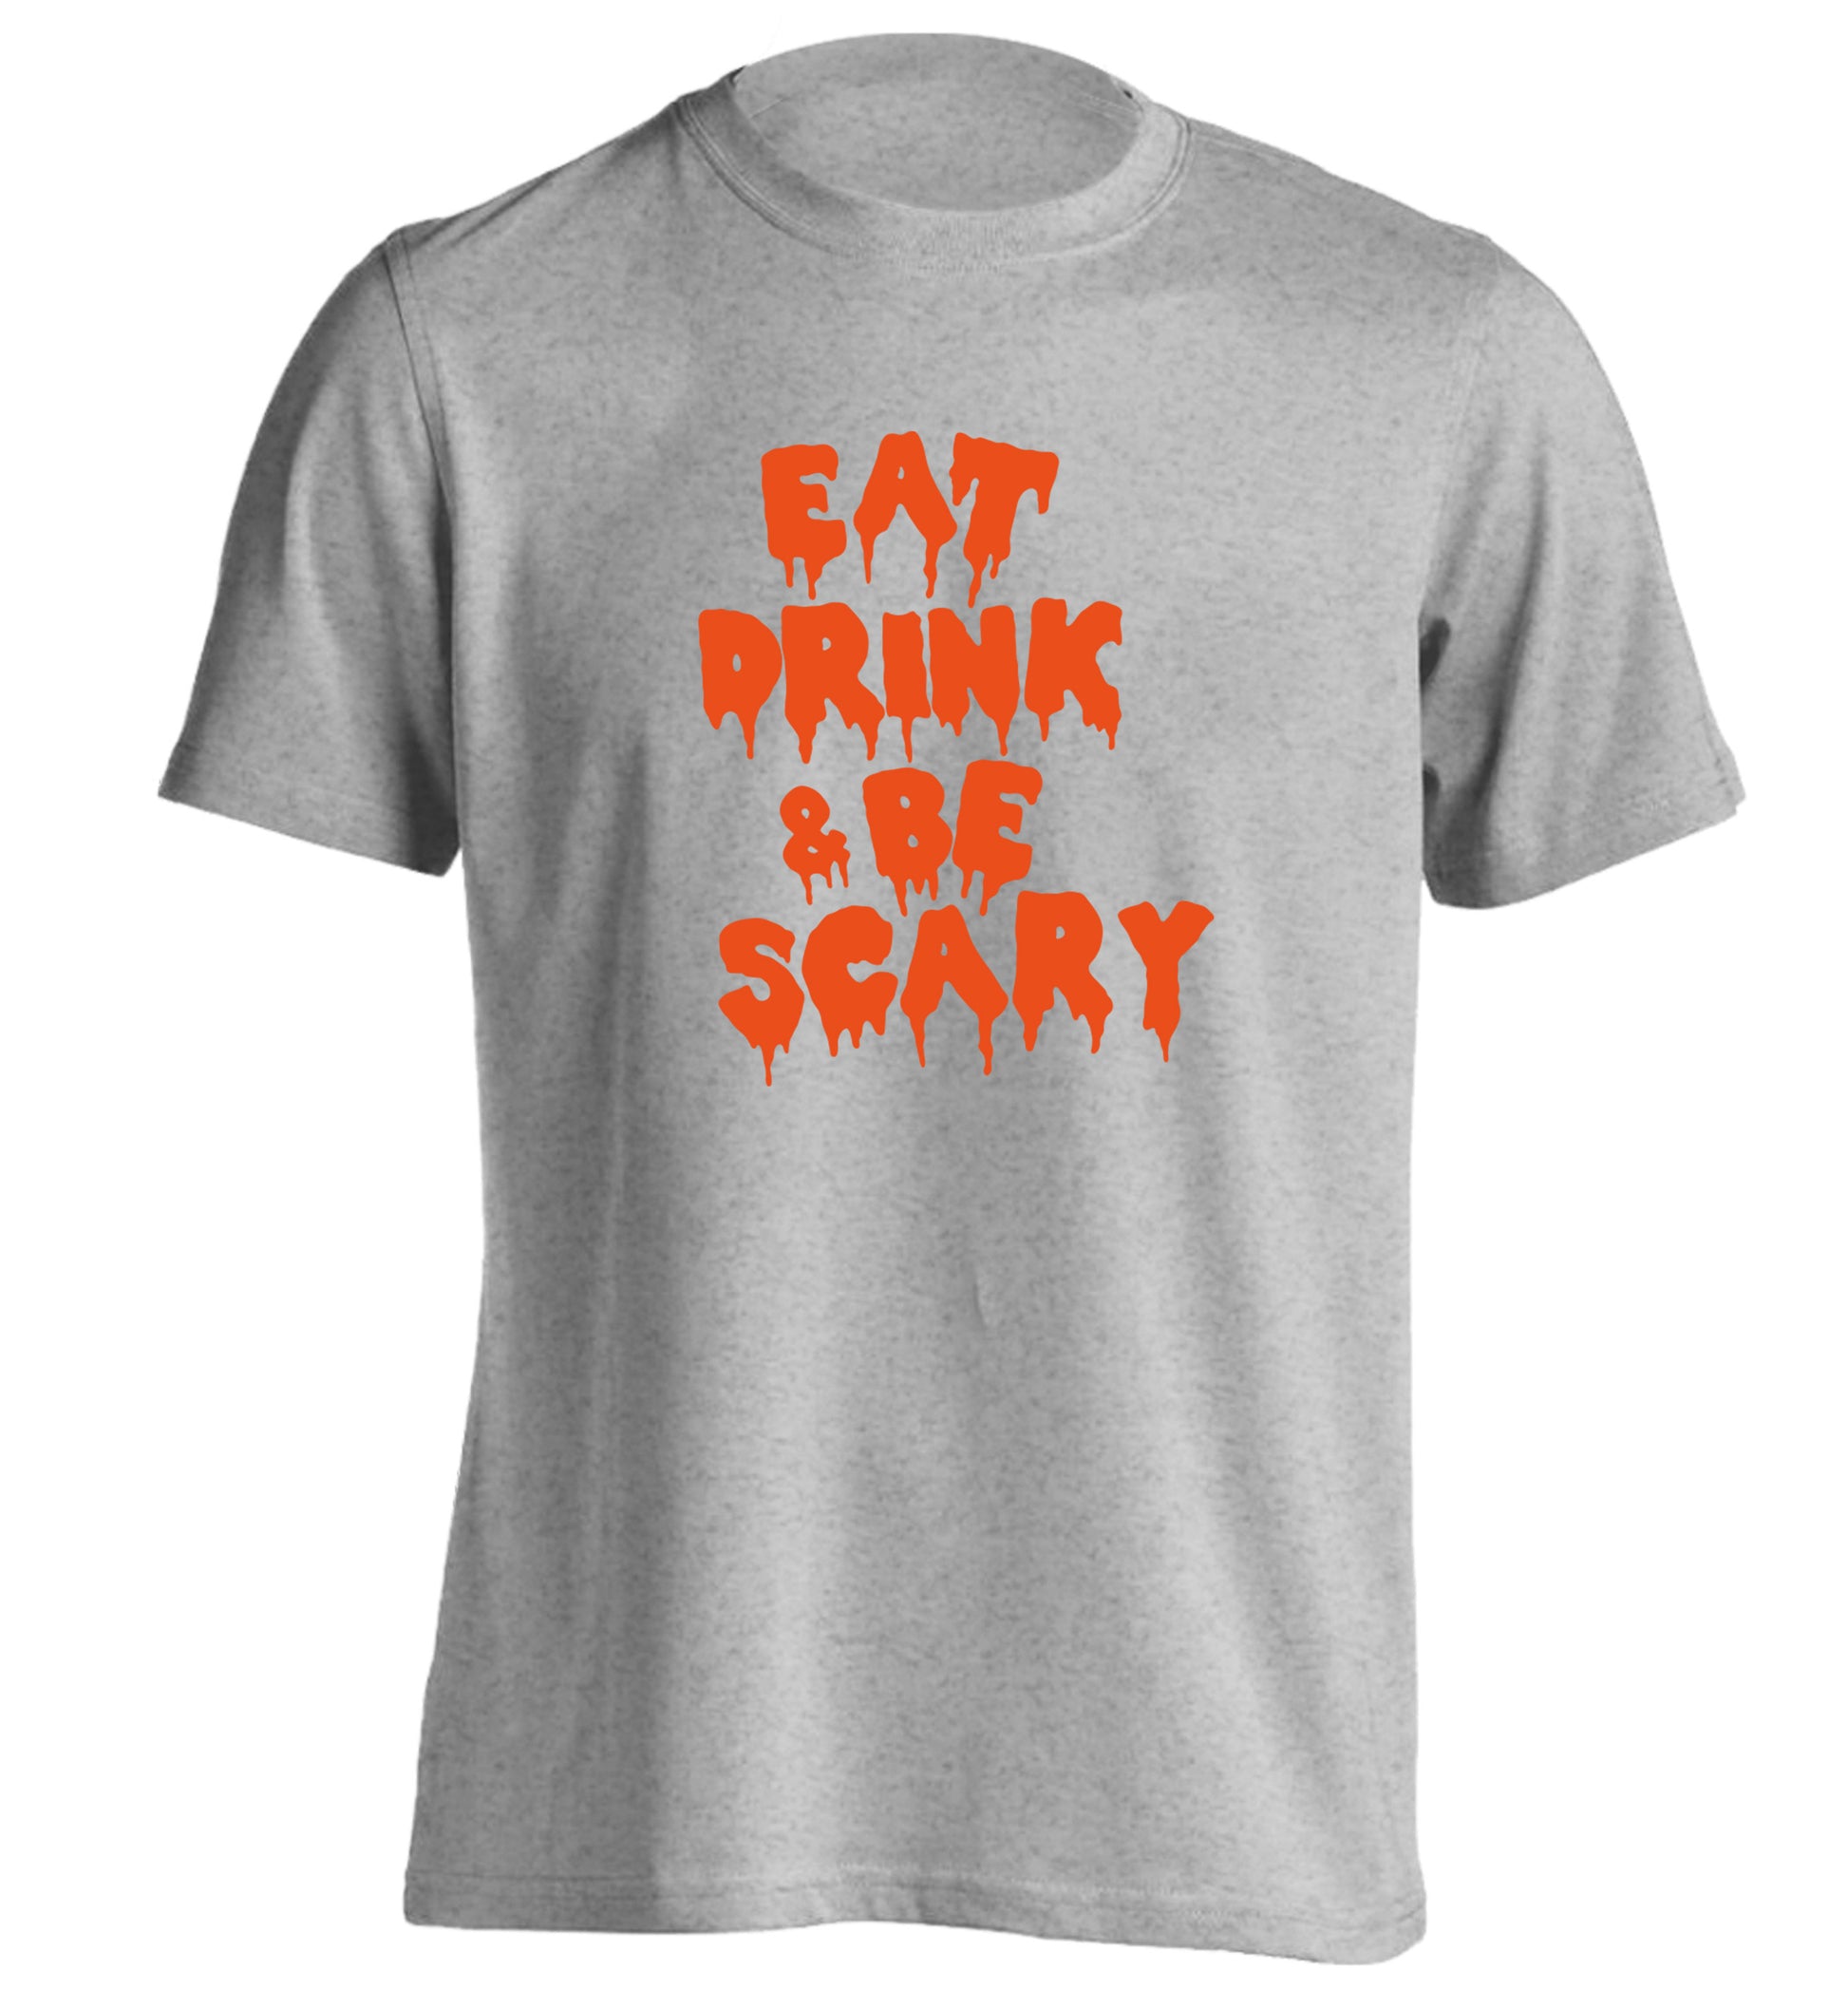 Eat drink and be scary adults unisex grey Tshirt 2XL